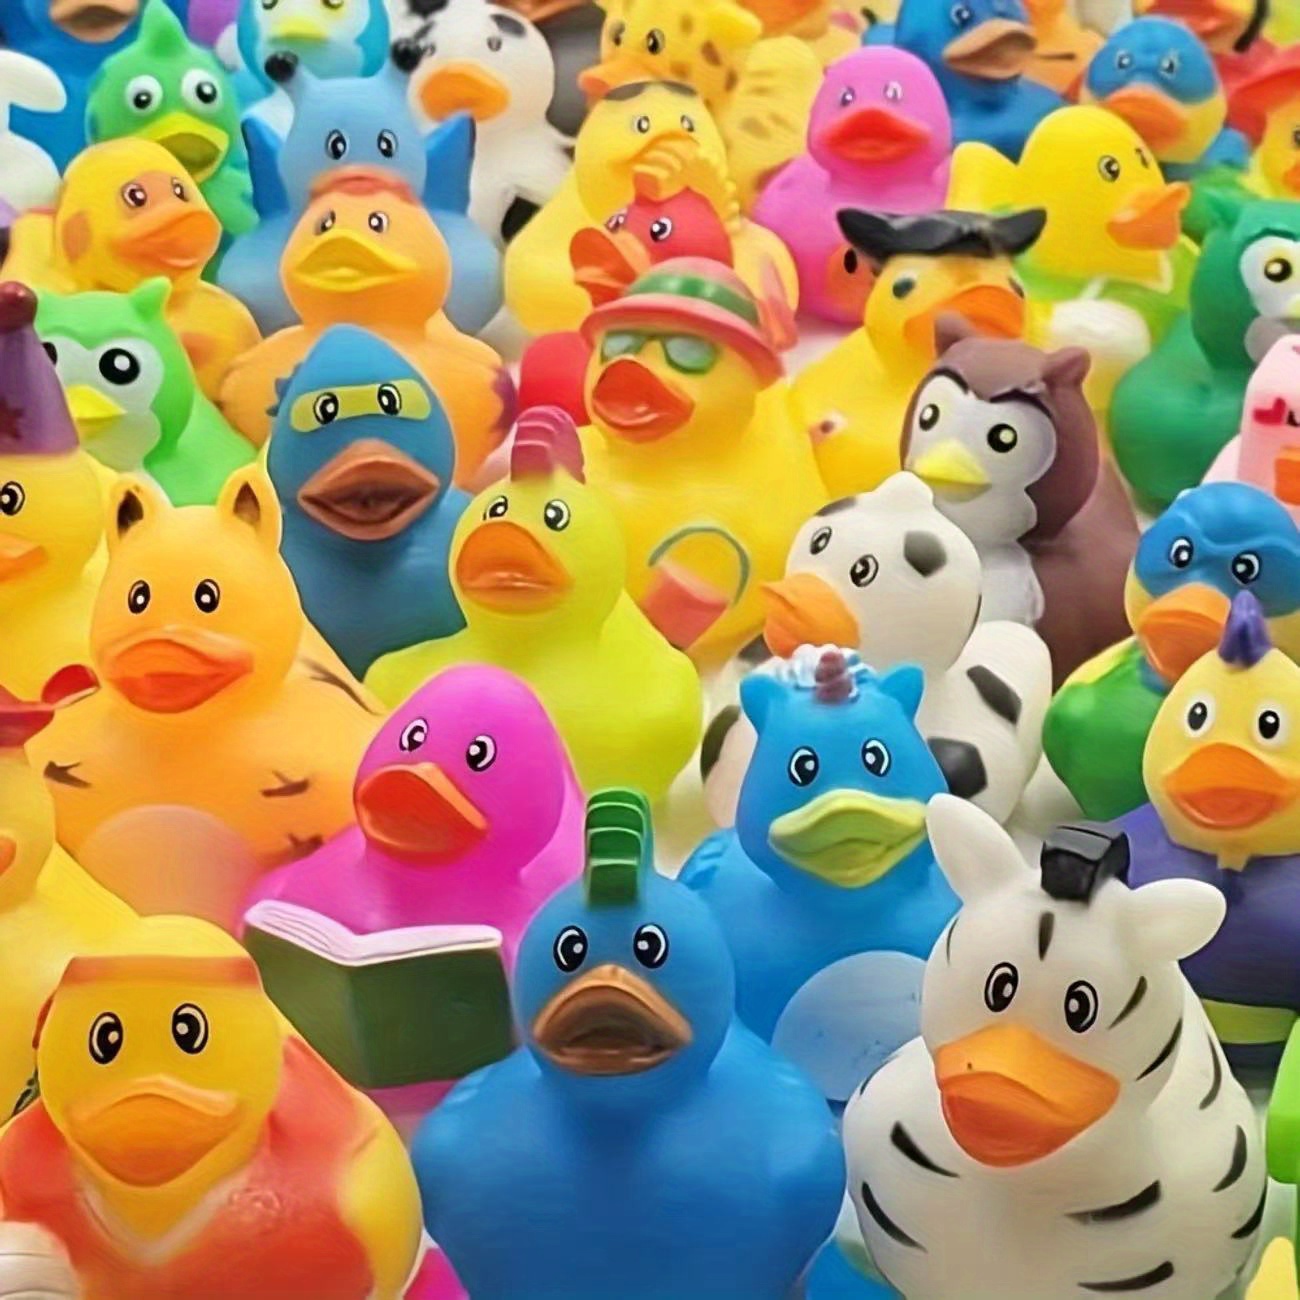 50pcs Rubber Ducks for Baby Bath Toy Shower Birthday Party Favors Gift